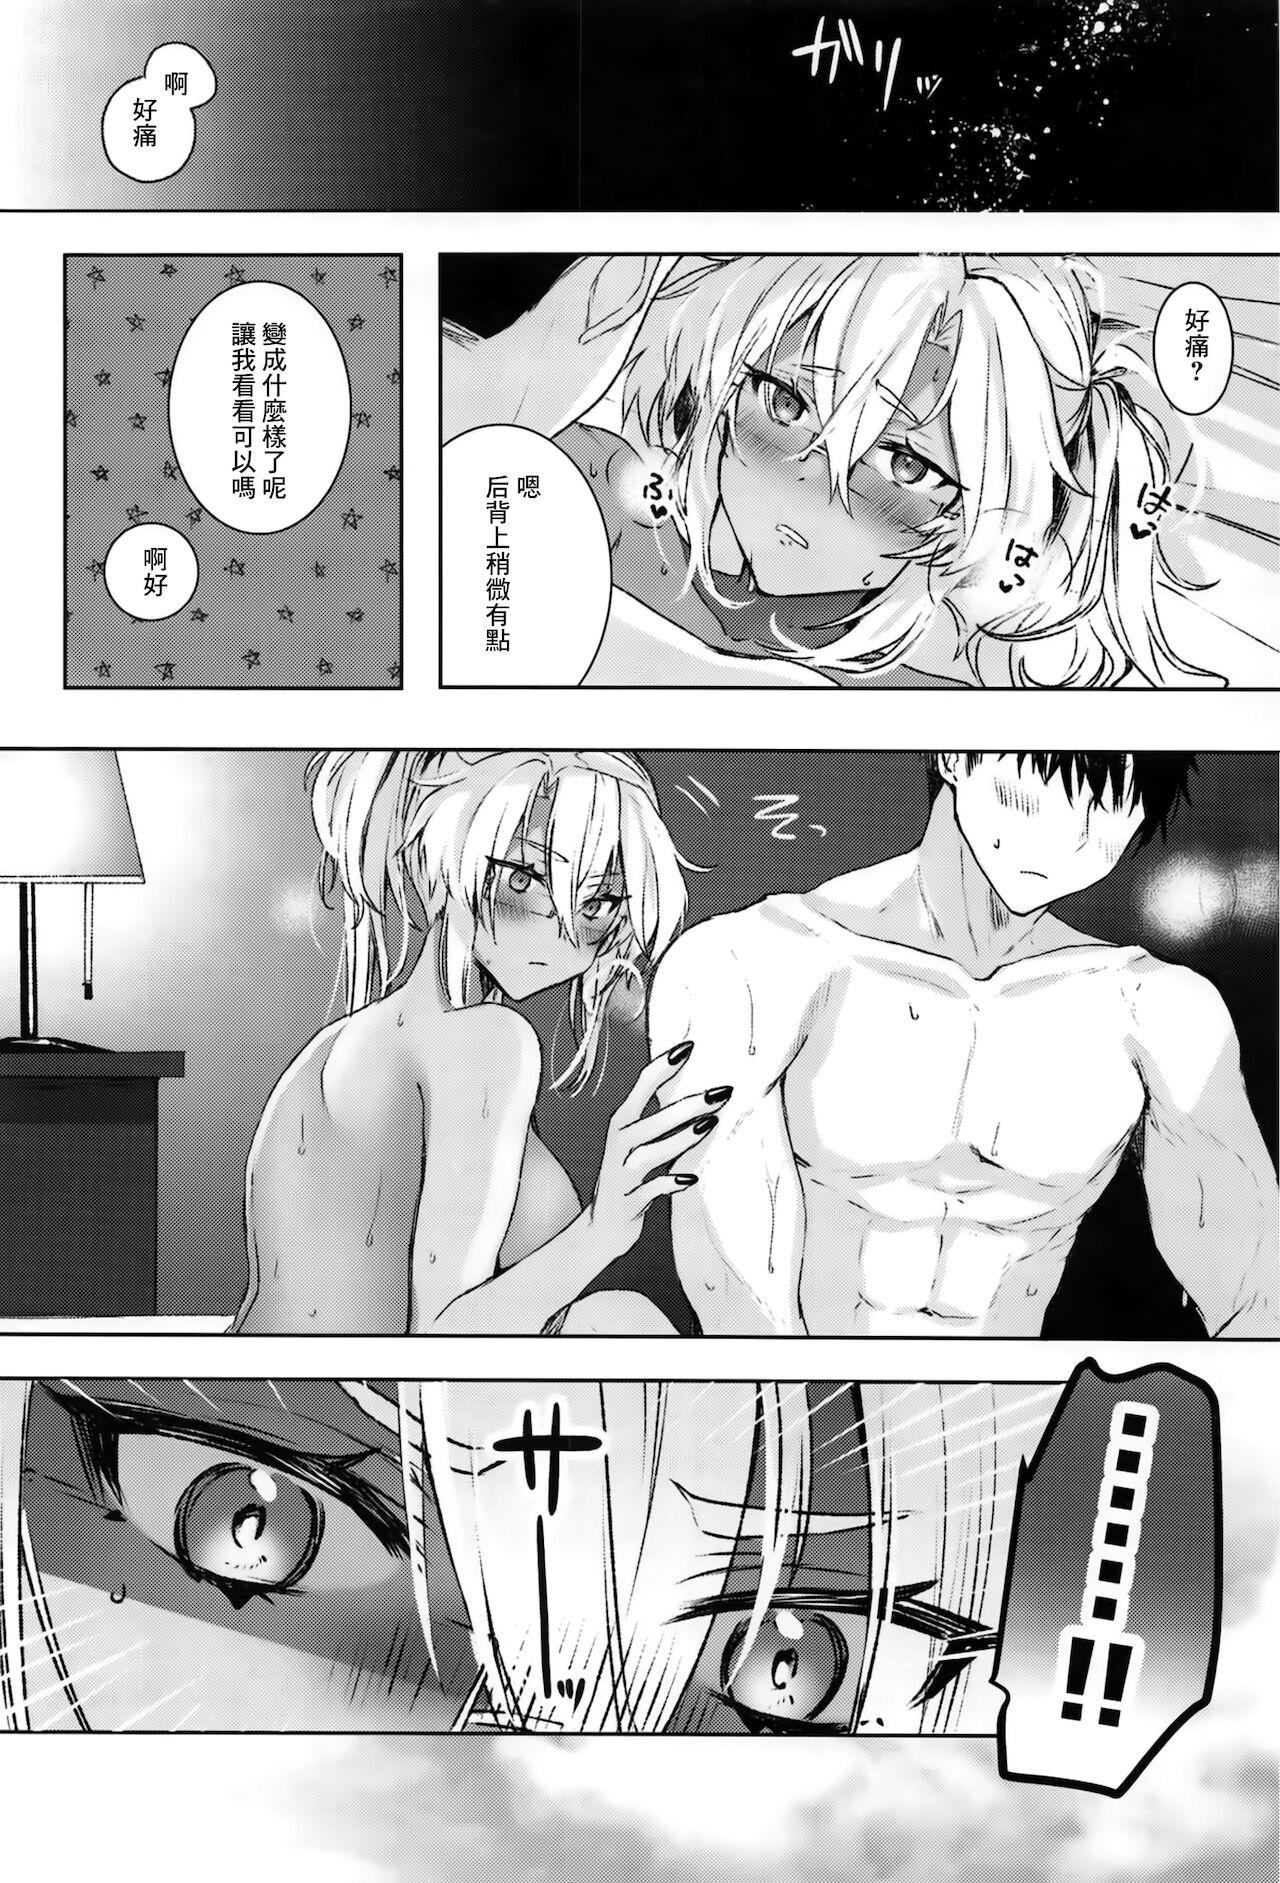 Free Fuck 武蔵さんの夜事情 秘書艦の匙加減編 - Kantai collection Gay Porn - Page 3